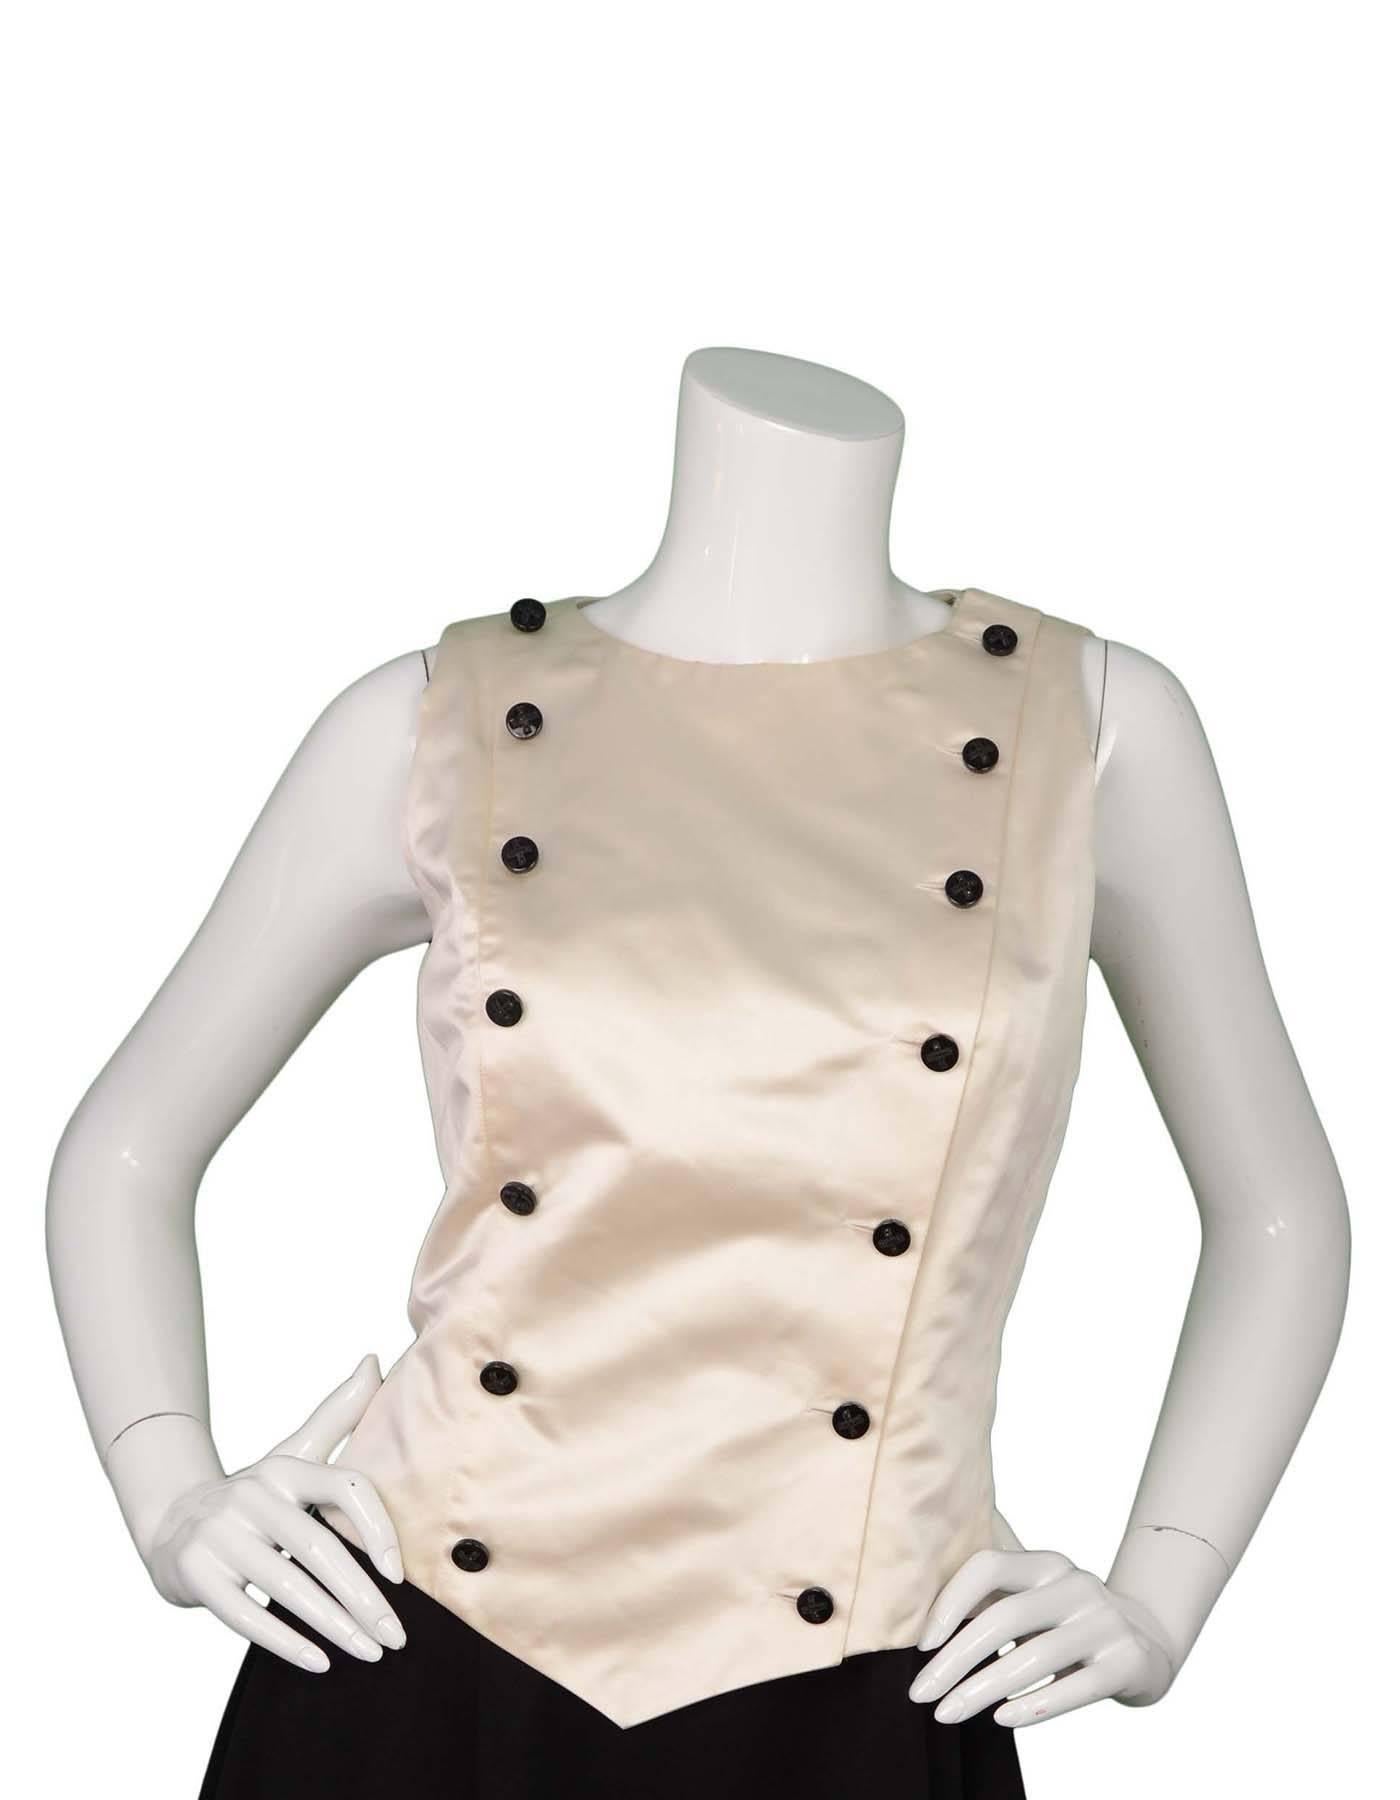 Chanel Ivory Satin Double Breasted Vest 
Features black buttons going down front sides with black x rhinestones

Made in: France
Year of Production: 2006
Color: White and black
Composition: 100% silk
Lining: Ivory, 100% silk
Closure/Opening: Double